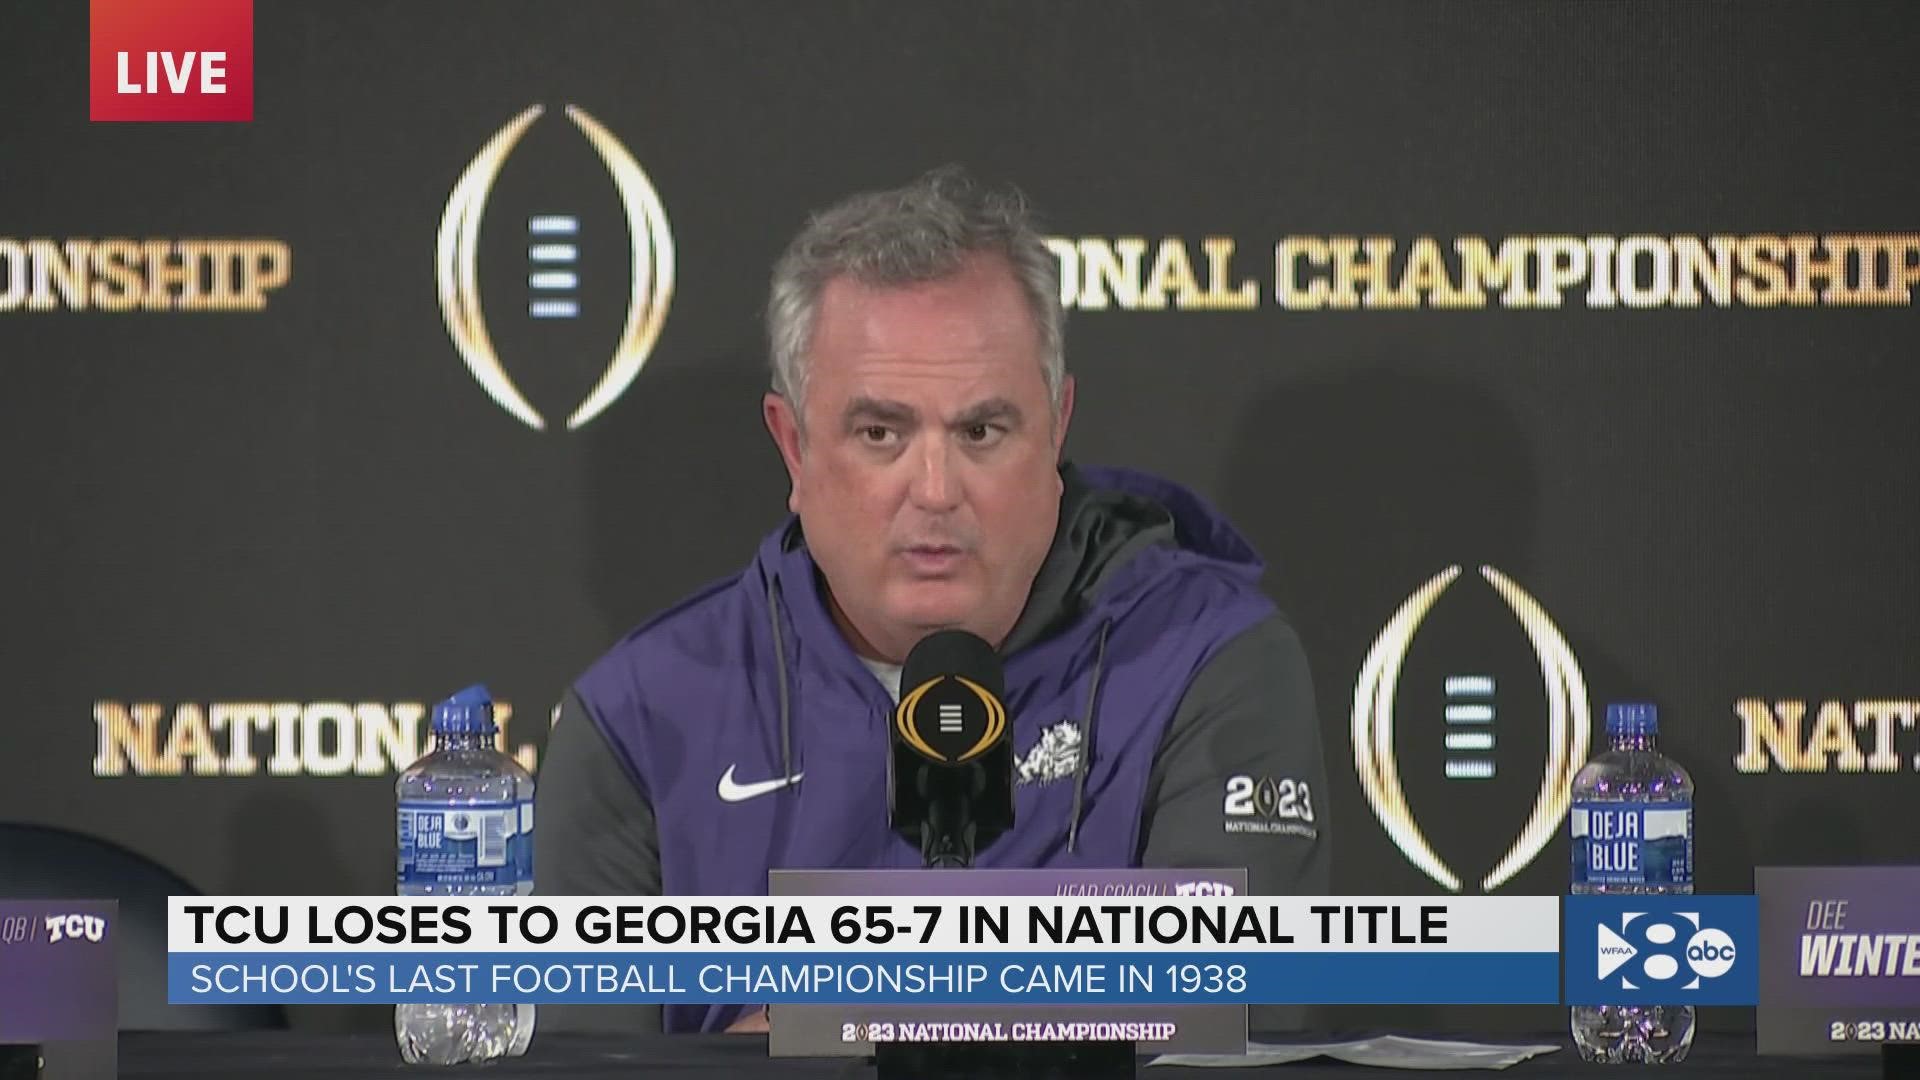 TCU lost to Georgia in the national title game, 65-7. It was the largest blowout loss in college football national championship game history.